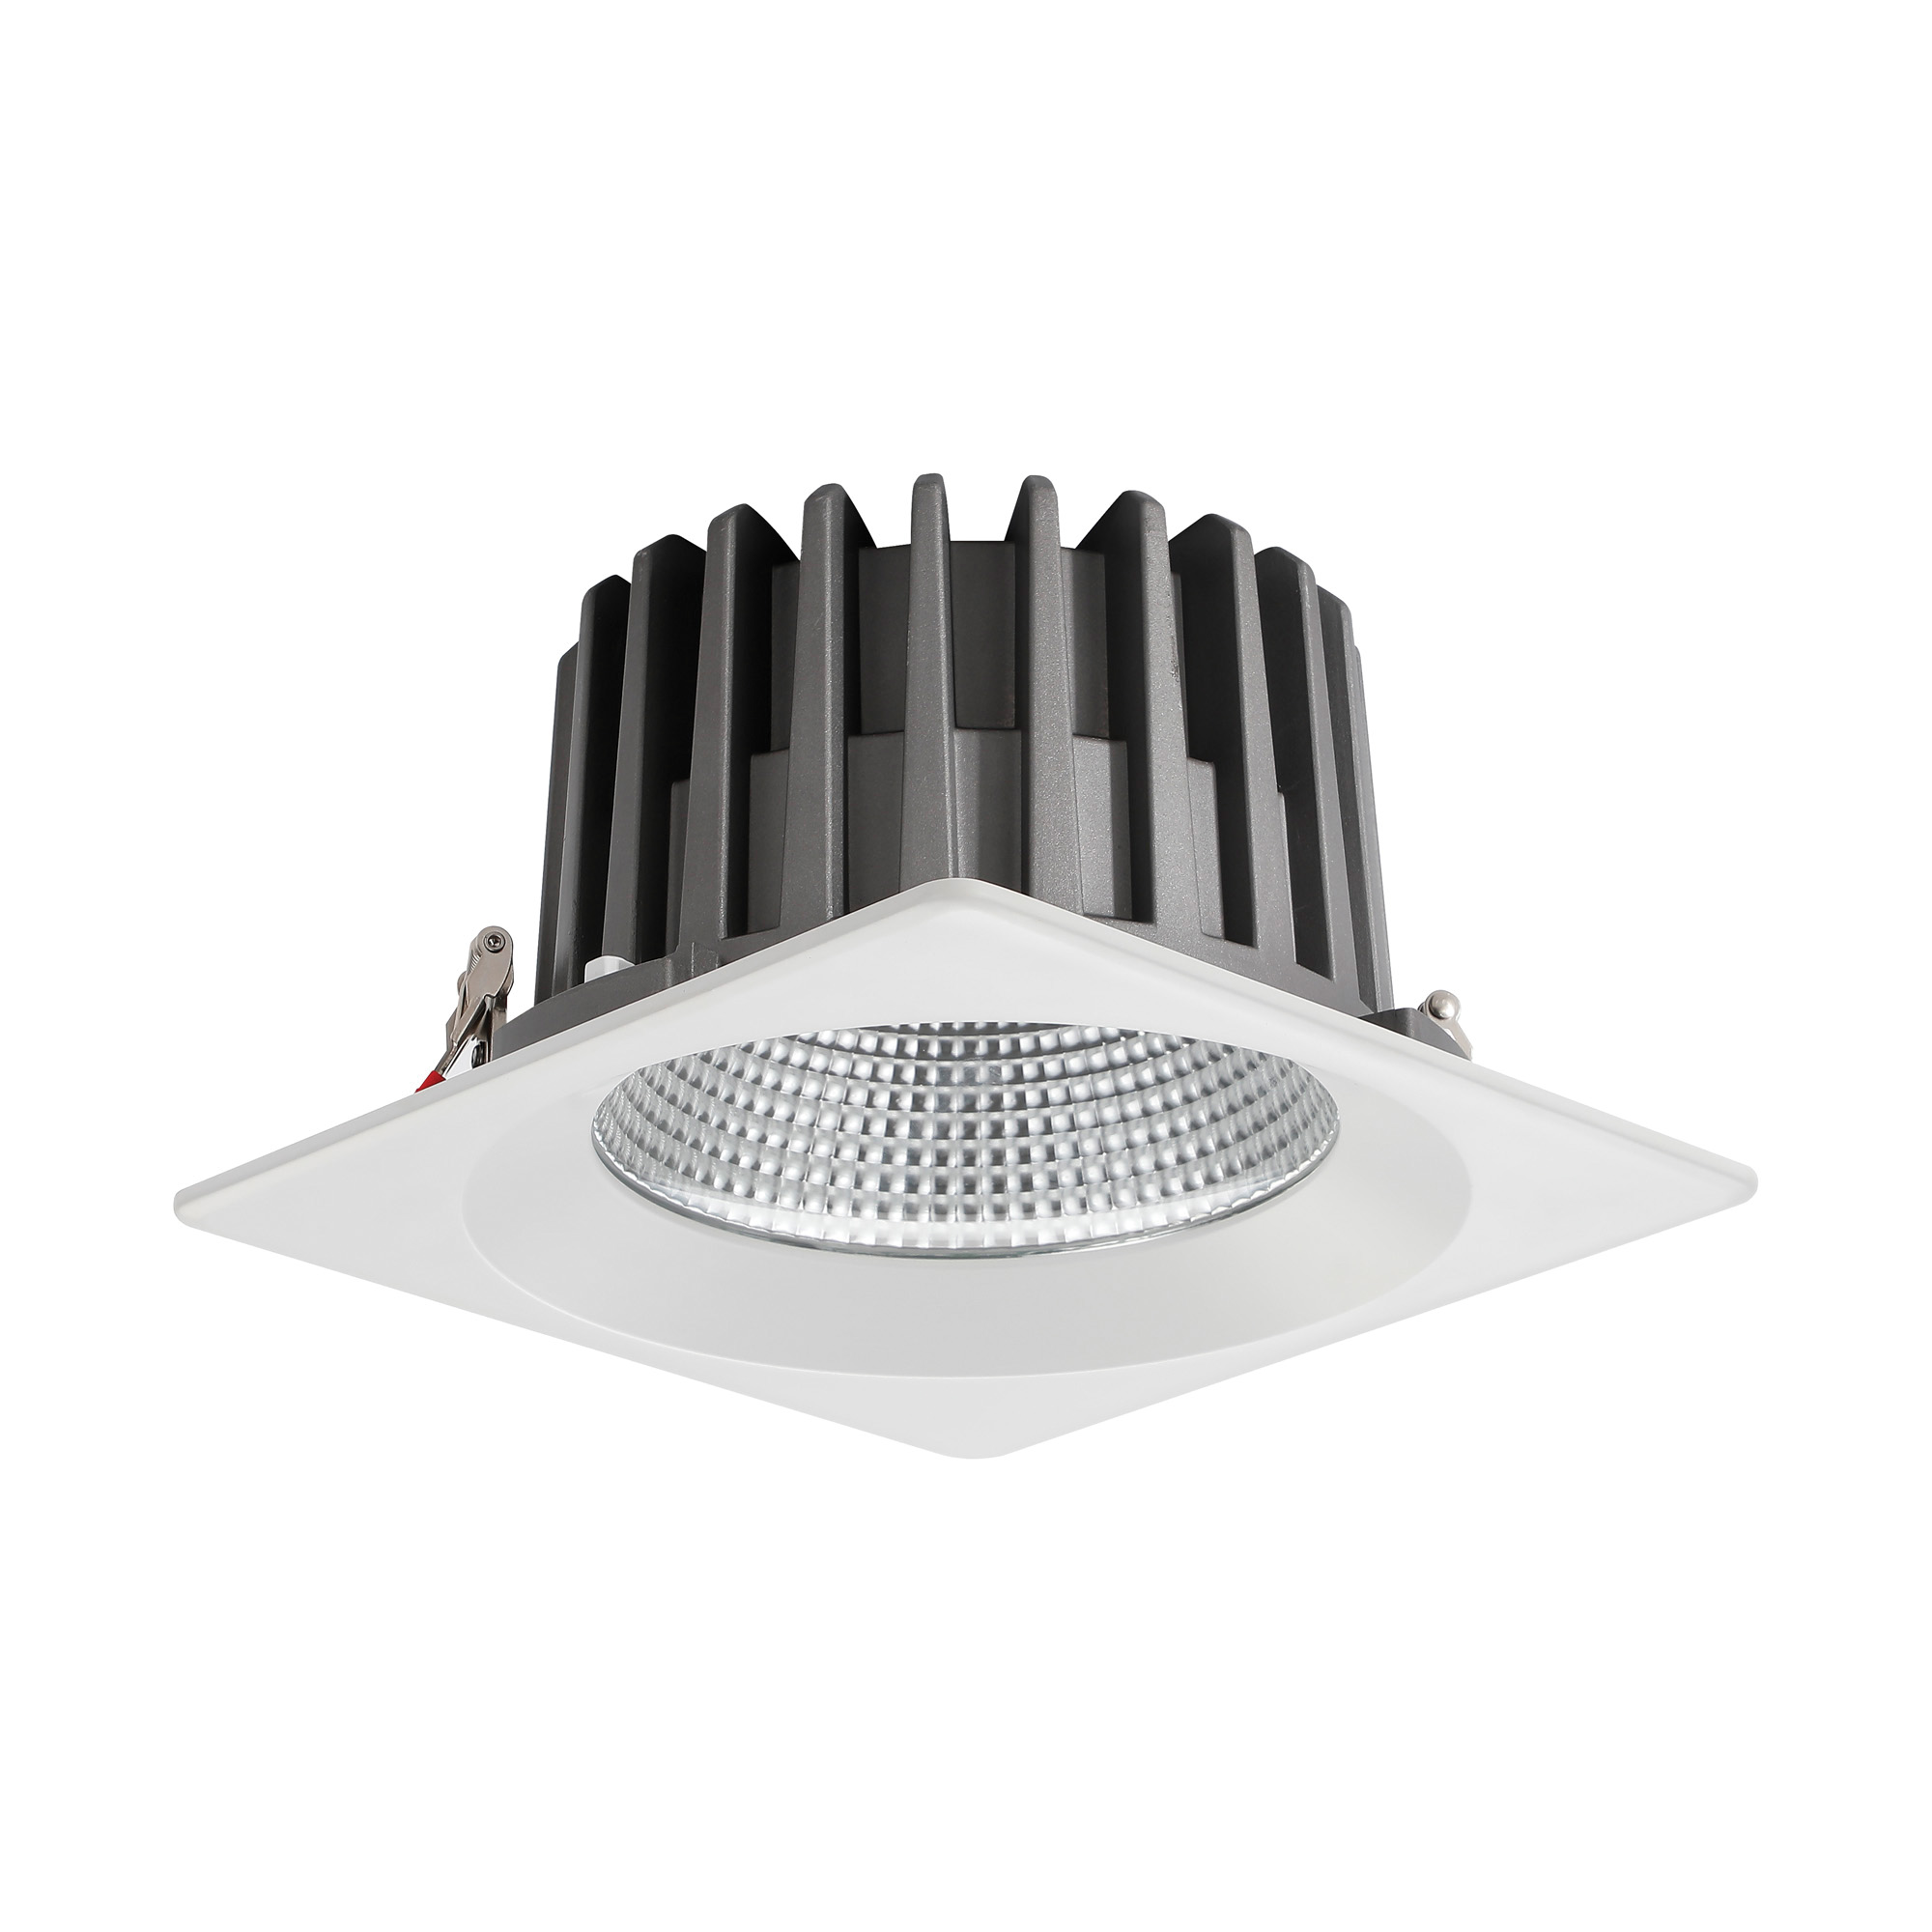 DL200084  Bionic 50; 50W; 1200mA; White Deep Square Recessed Downlight; 4500lm ;Cut Out 175mm; 50° ; 5000K; IP44; DRIVER INC.; 5yrs Warranty.